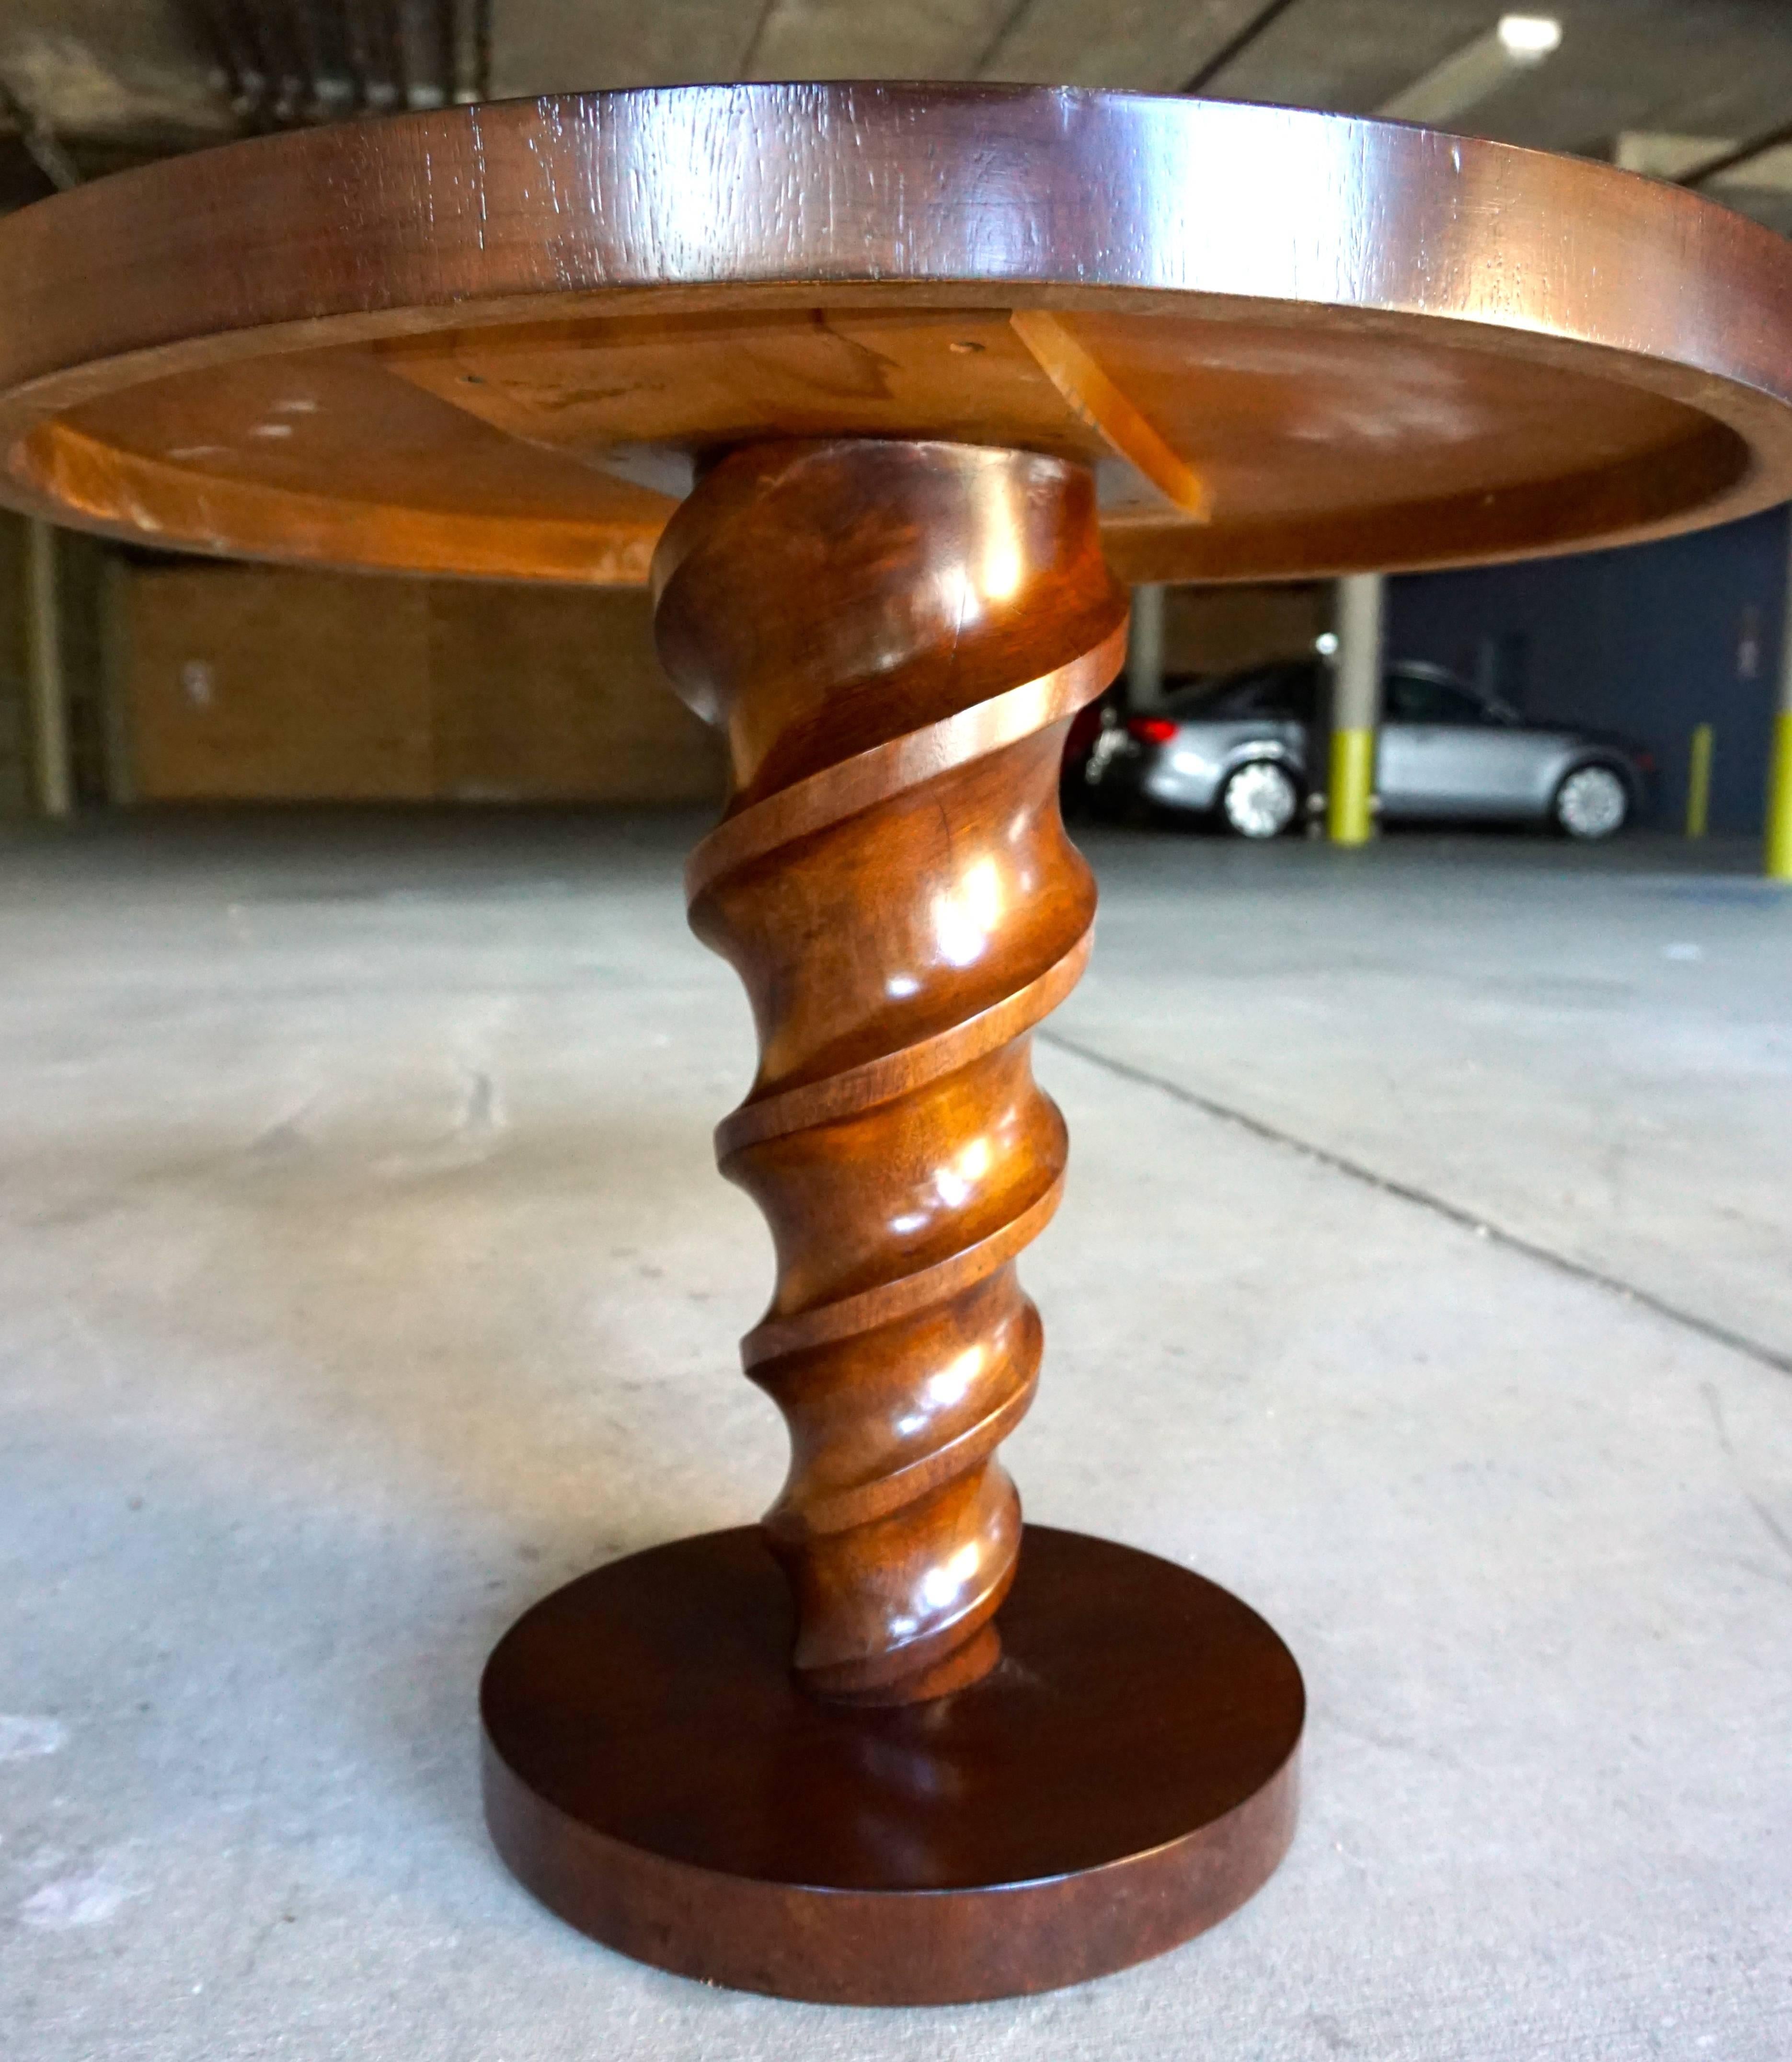 A rare circular side table with a carved "corkscrew"column support designed by Dutch designer Johan Tapp for his furniture company, Tapp Inc. Circa 1940s. The round top and plinth base is veneered in walnut parquetry and the column is